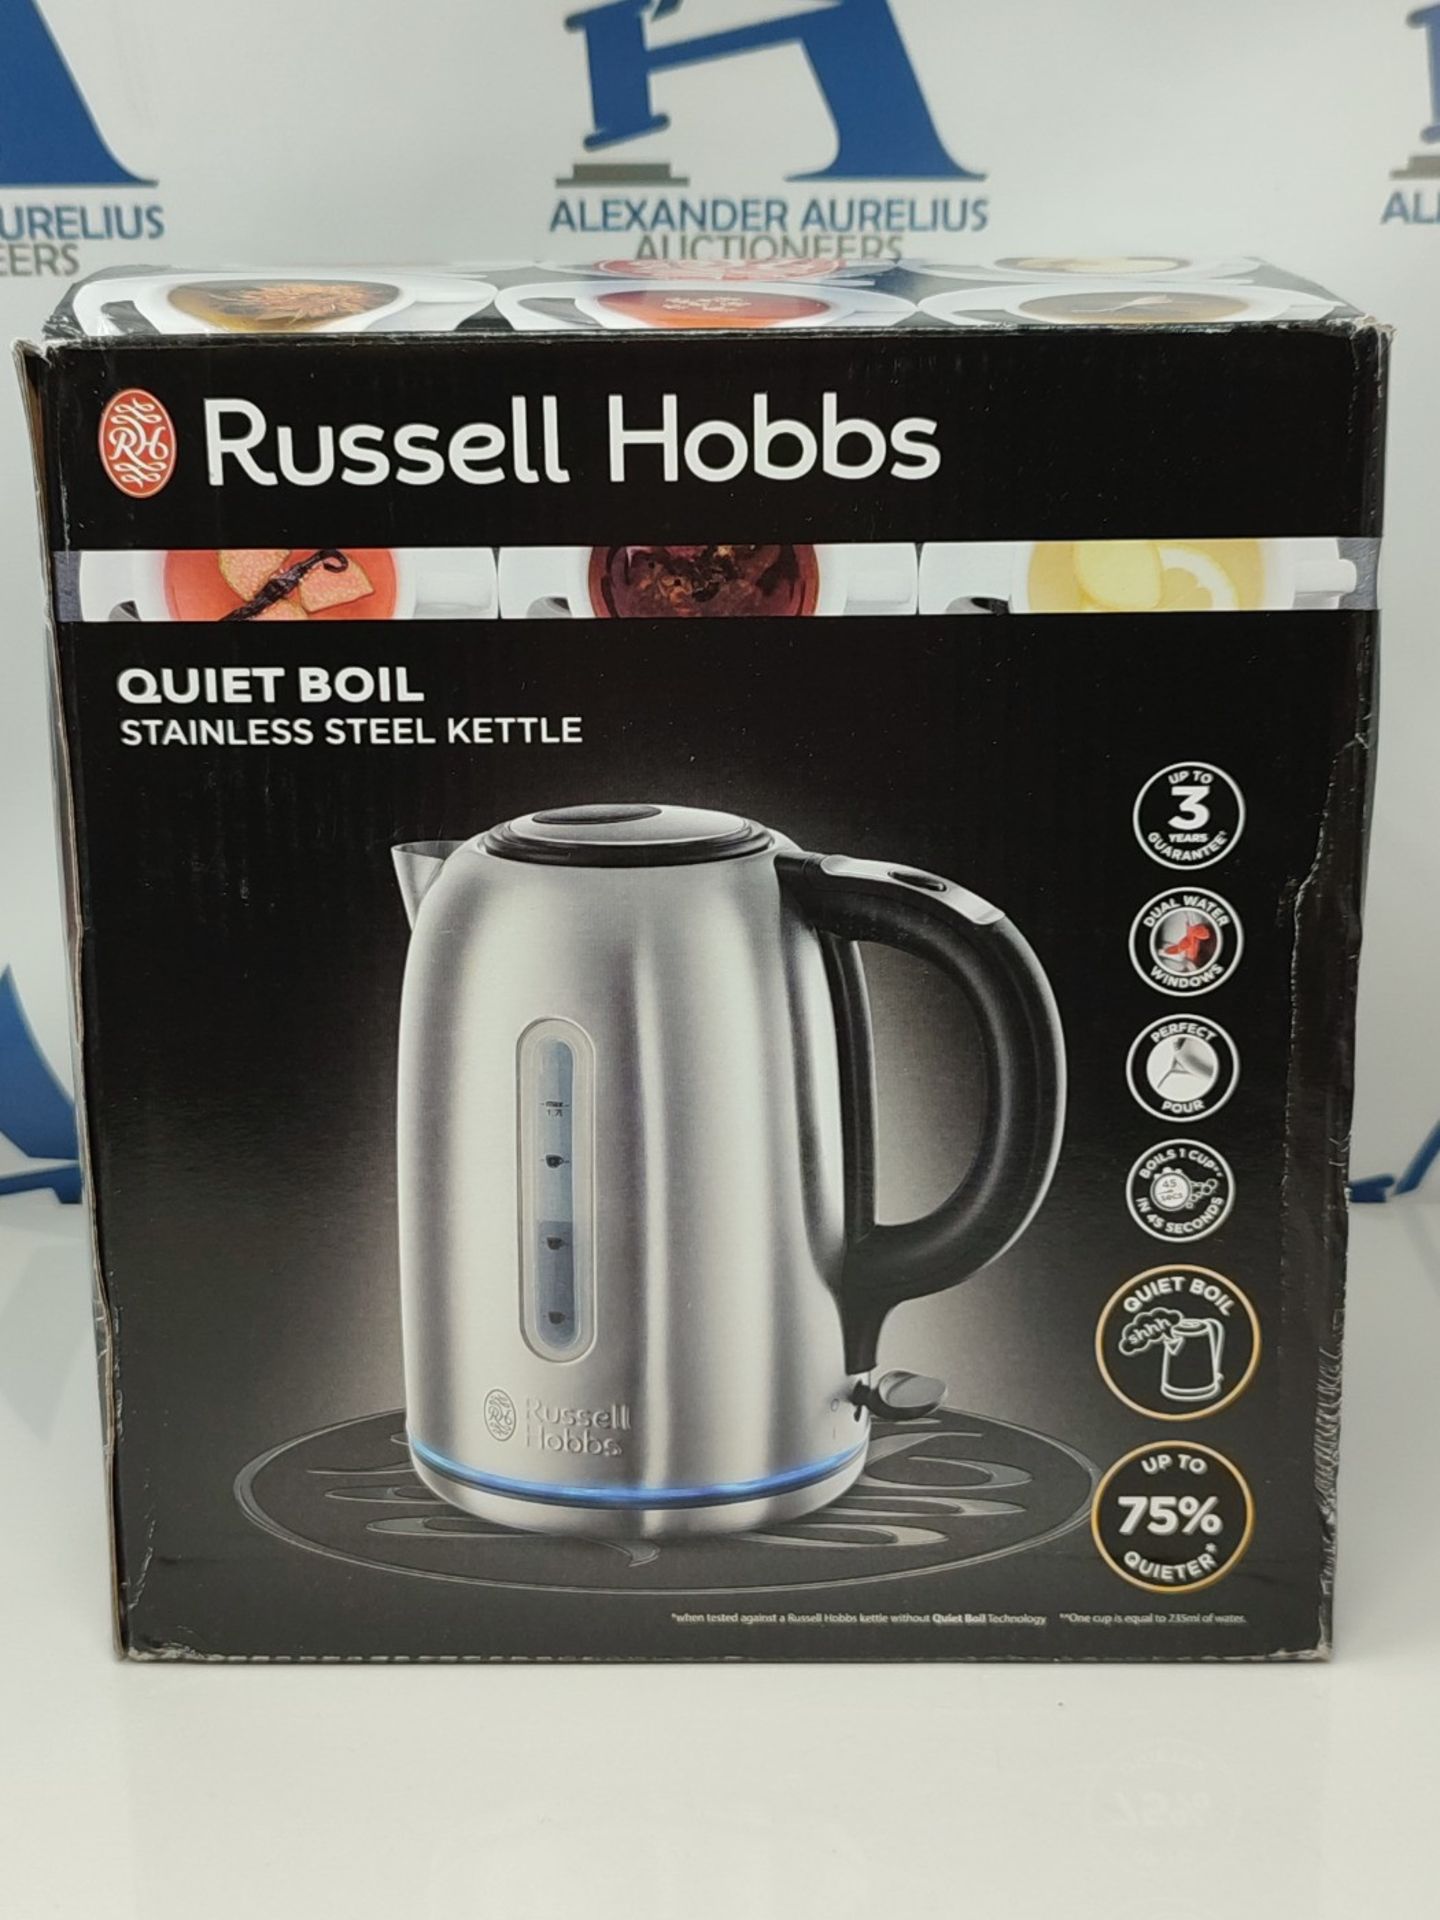 Russell Hobbs 20460 Quiet Boil Kettle, Brushed Stainless Steel, 3000W, 1.7 Litres - Image 2 of 3